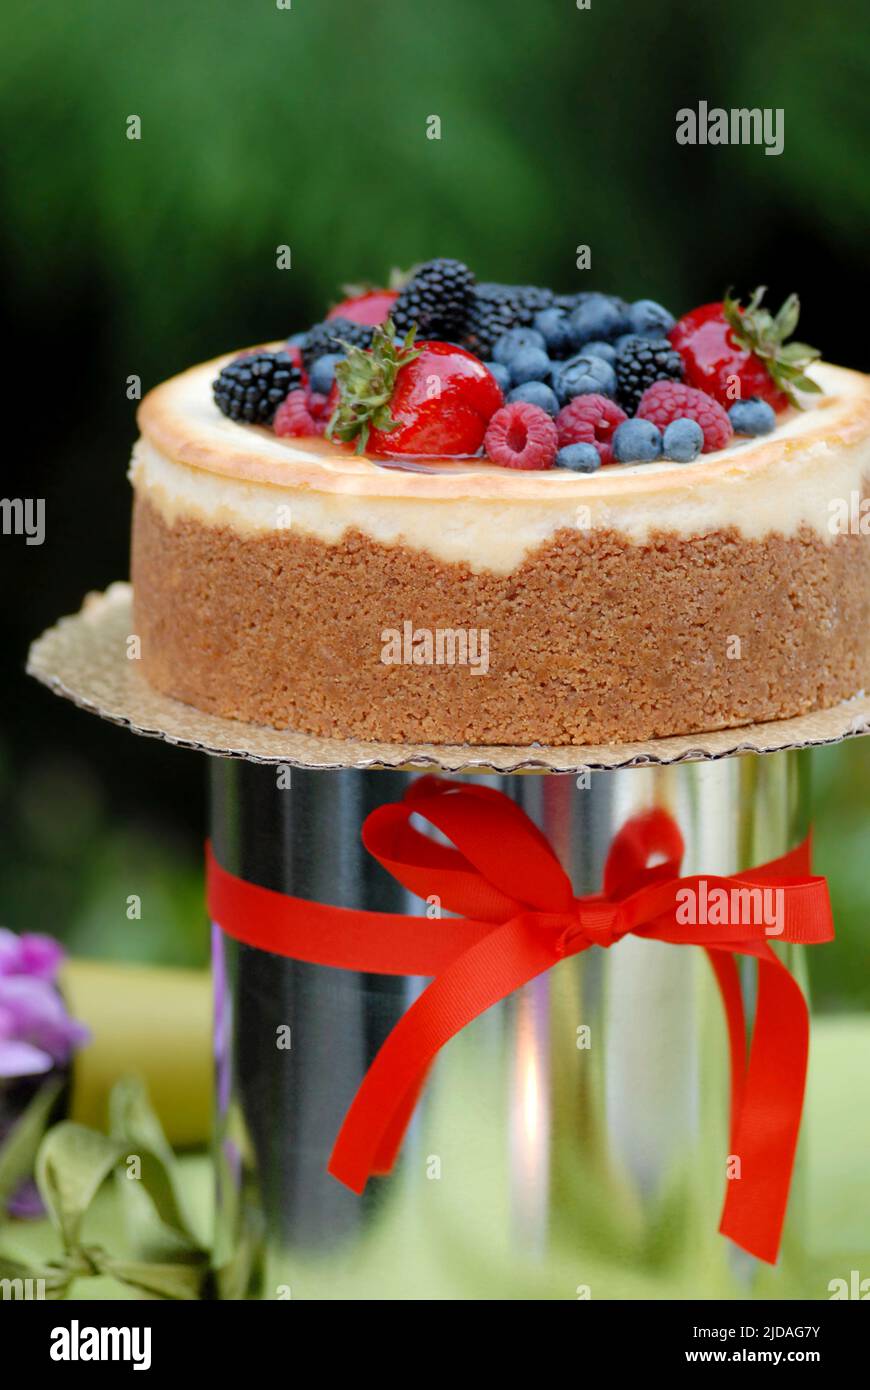 A cake with icing and fresh berries and a red ribbon. Stock Photo